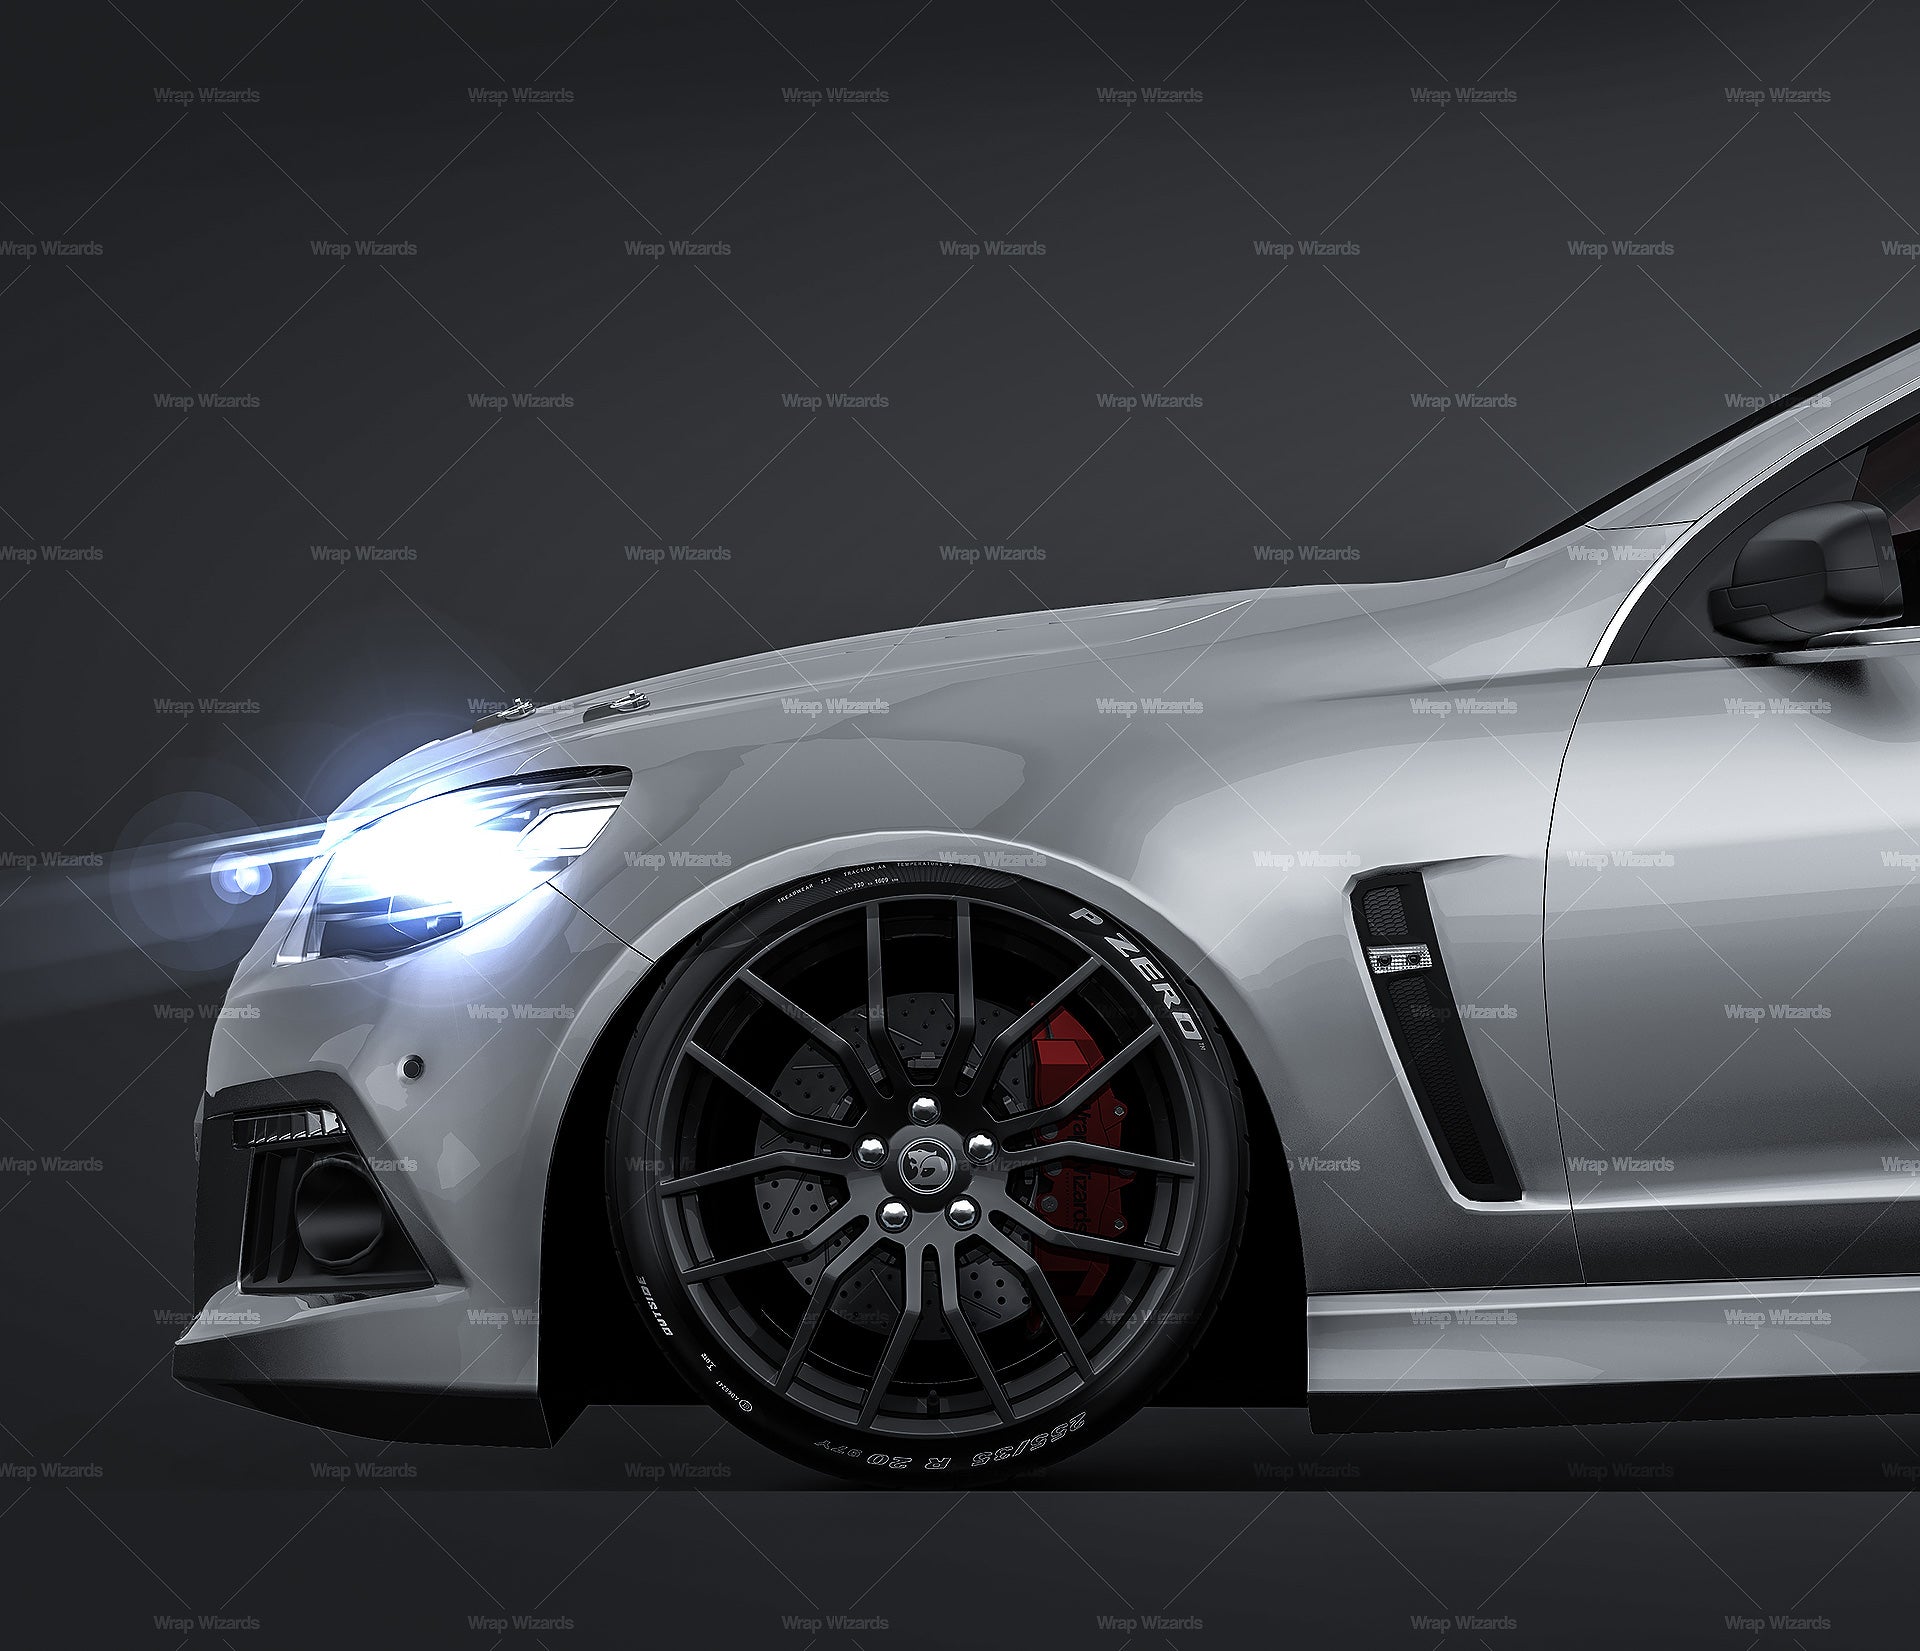 HSV Generation F VF Clubsport R8 2014 with GTS rear wing, bonnet clips and rollcage (race version) glossy finish - all sides Car Mockup Template.psd